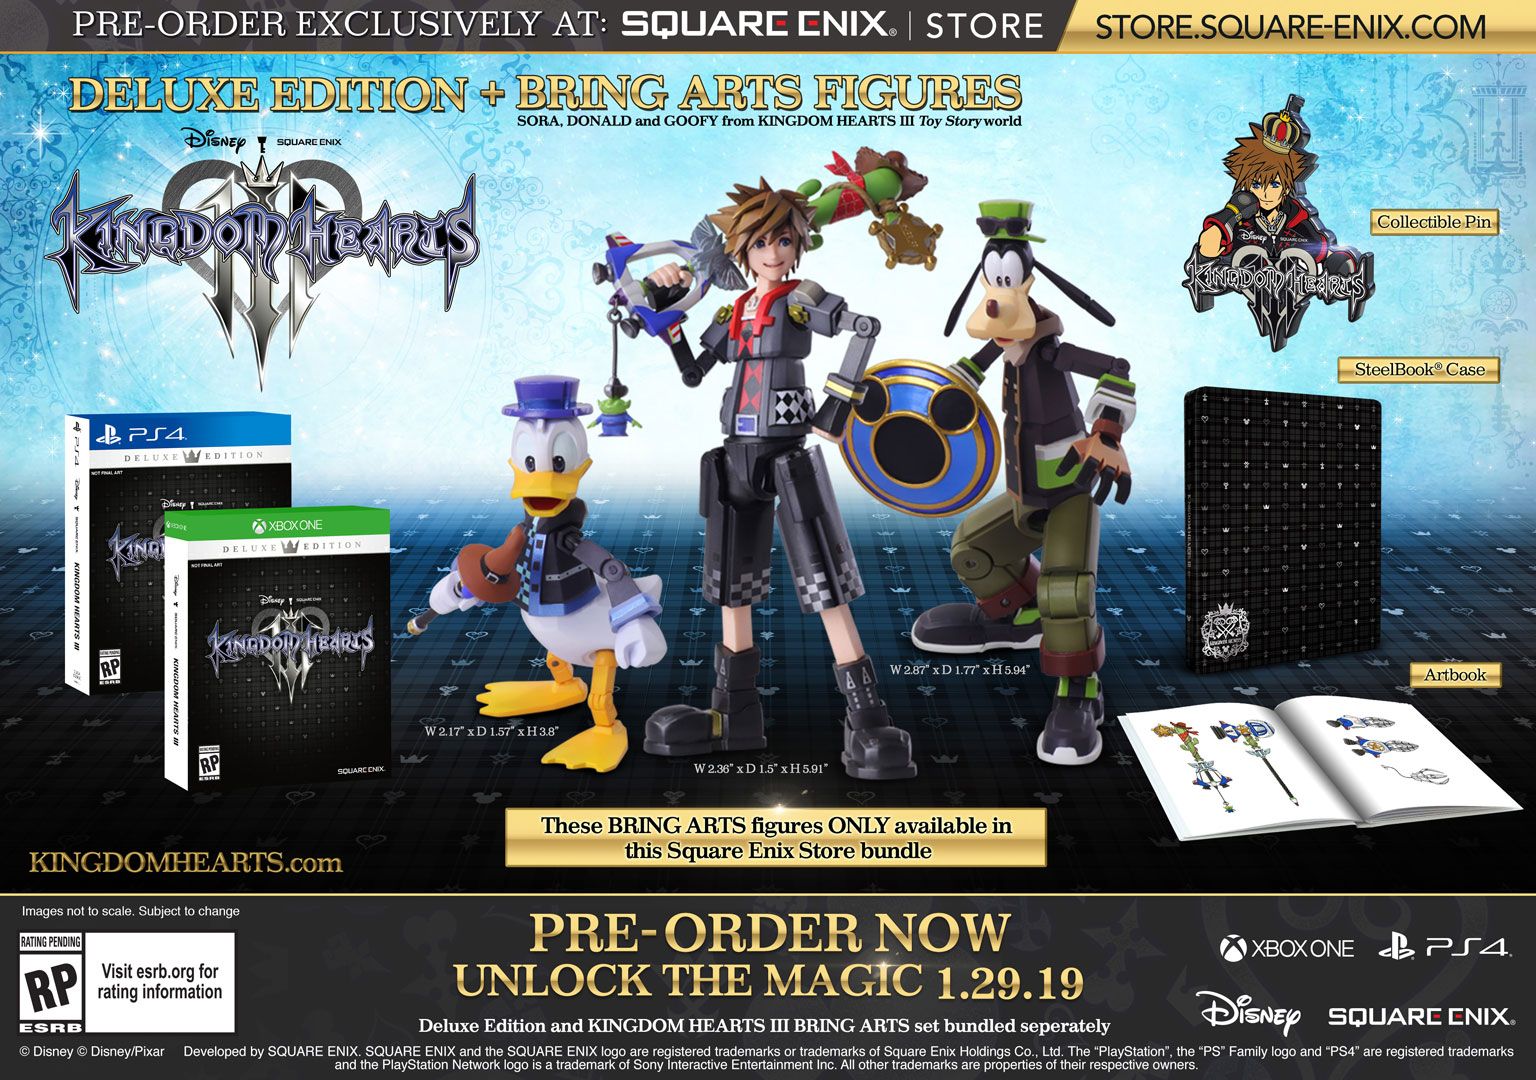 Previous Kingdom Hearts games now available on Xbox One